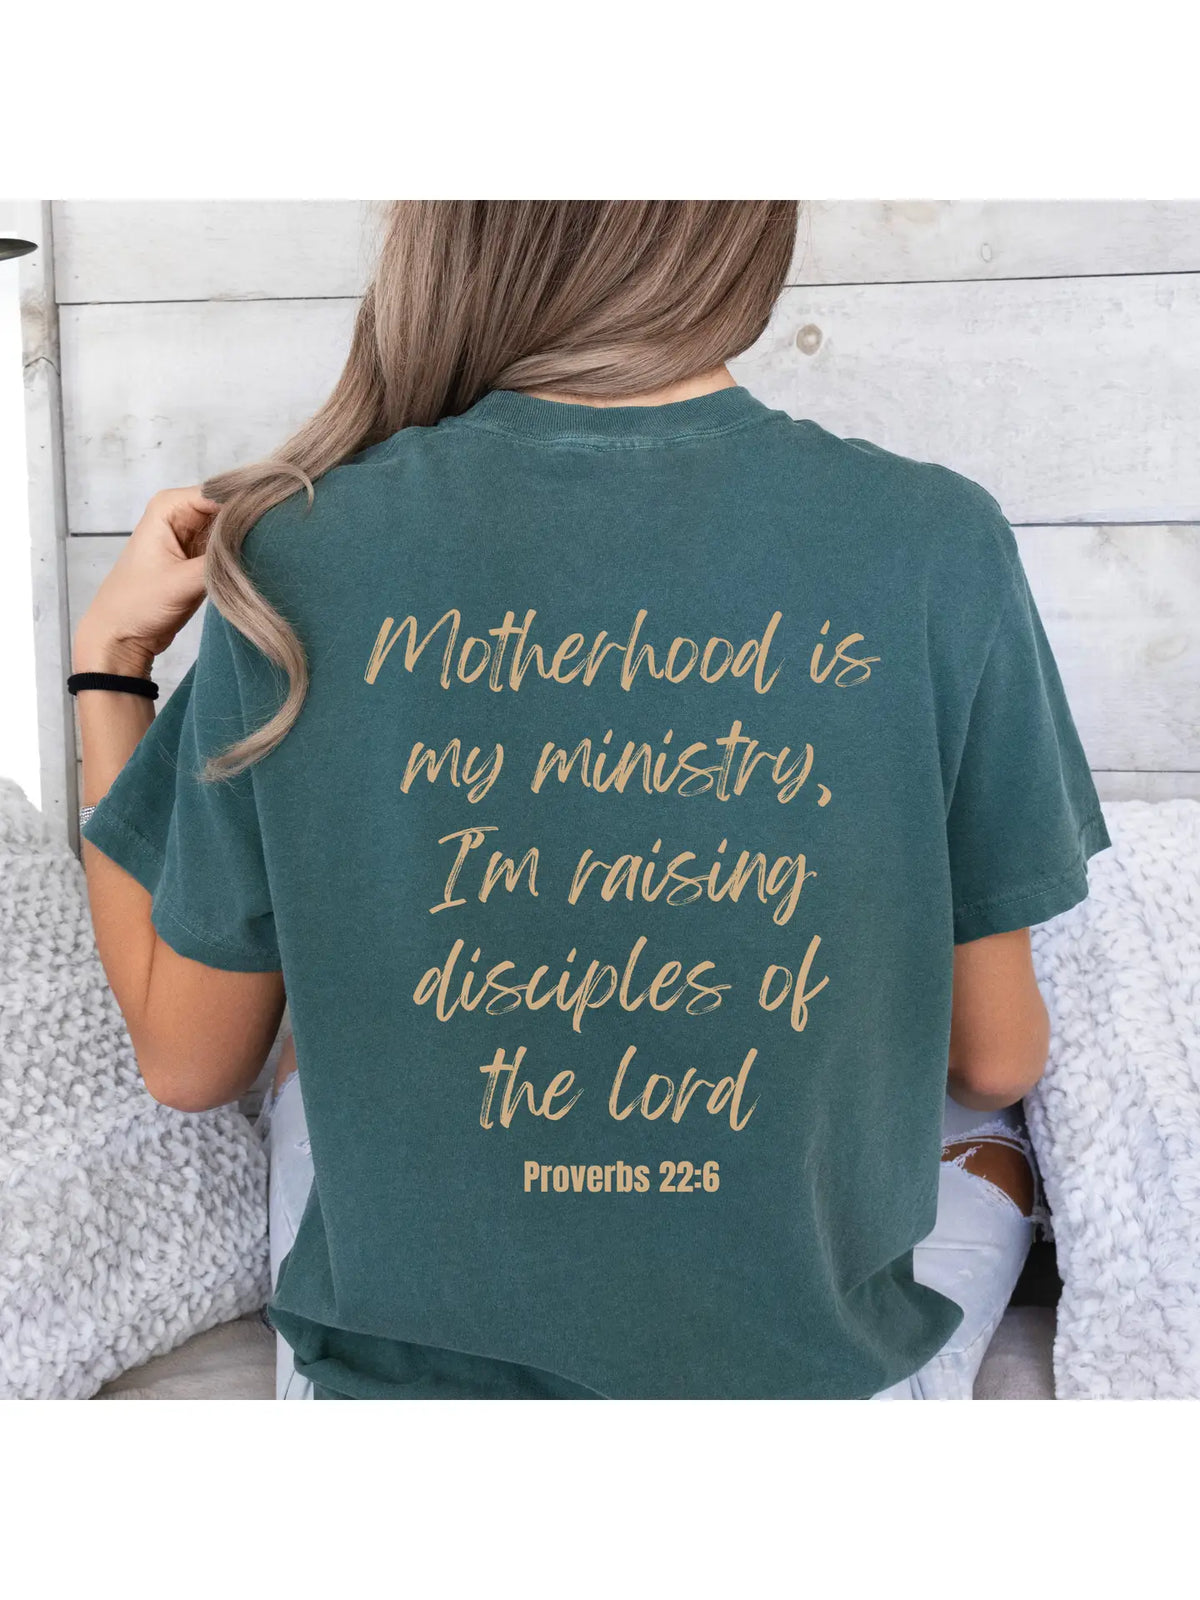 Proverbs 22:6 Graphic Tee